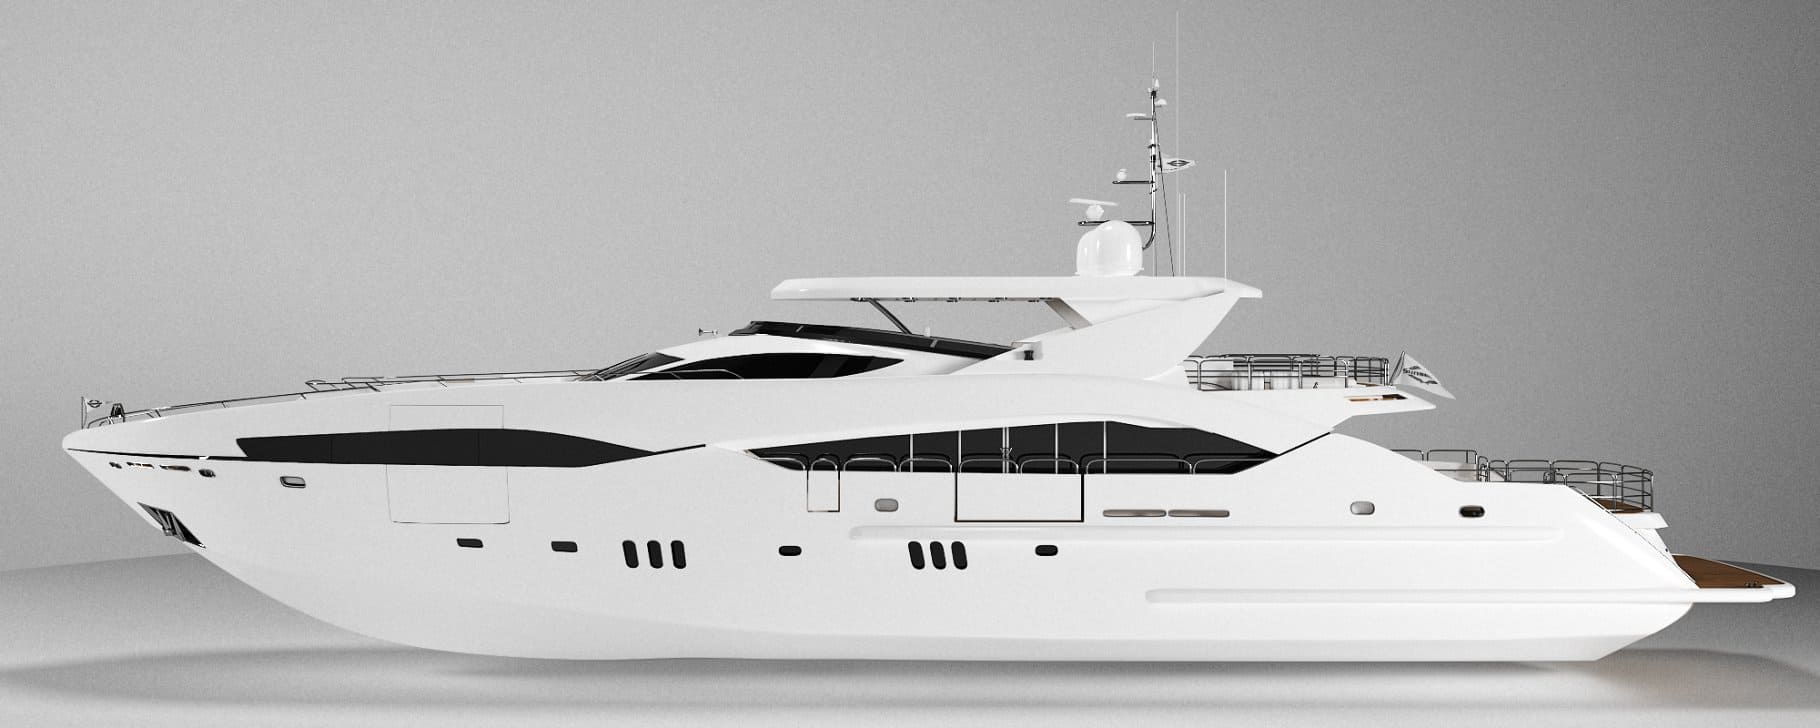 Side view of the white Sunseeker predator 130 Superyacht model in the graphics editor.